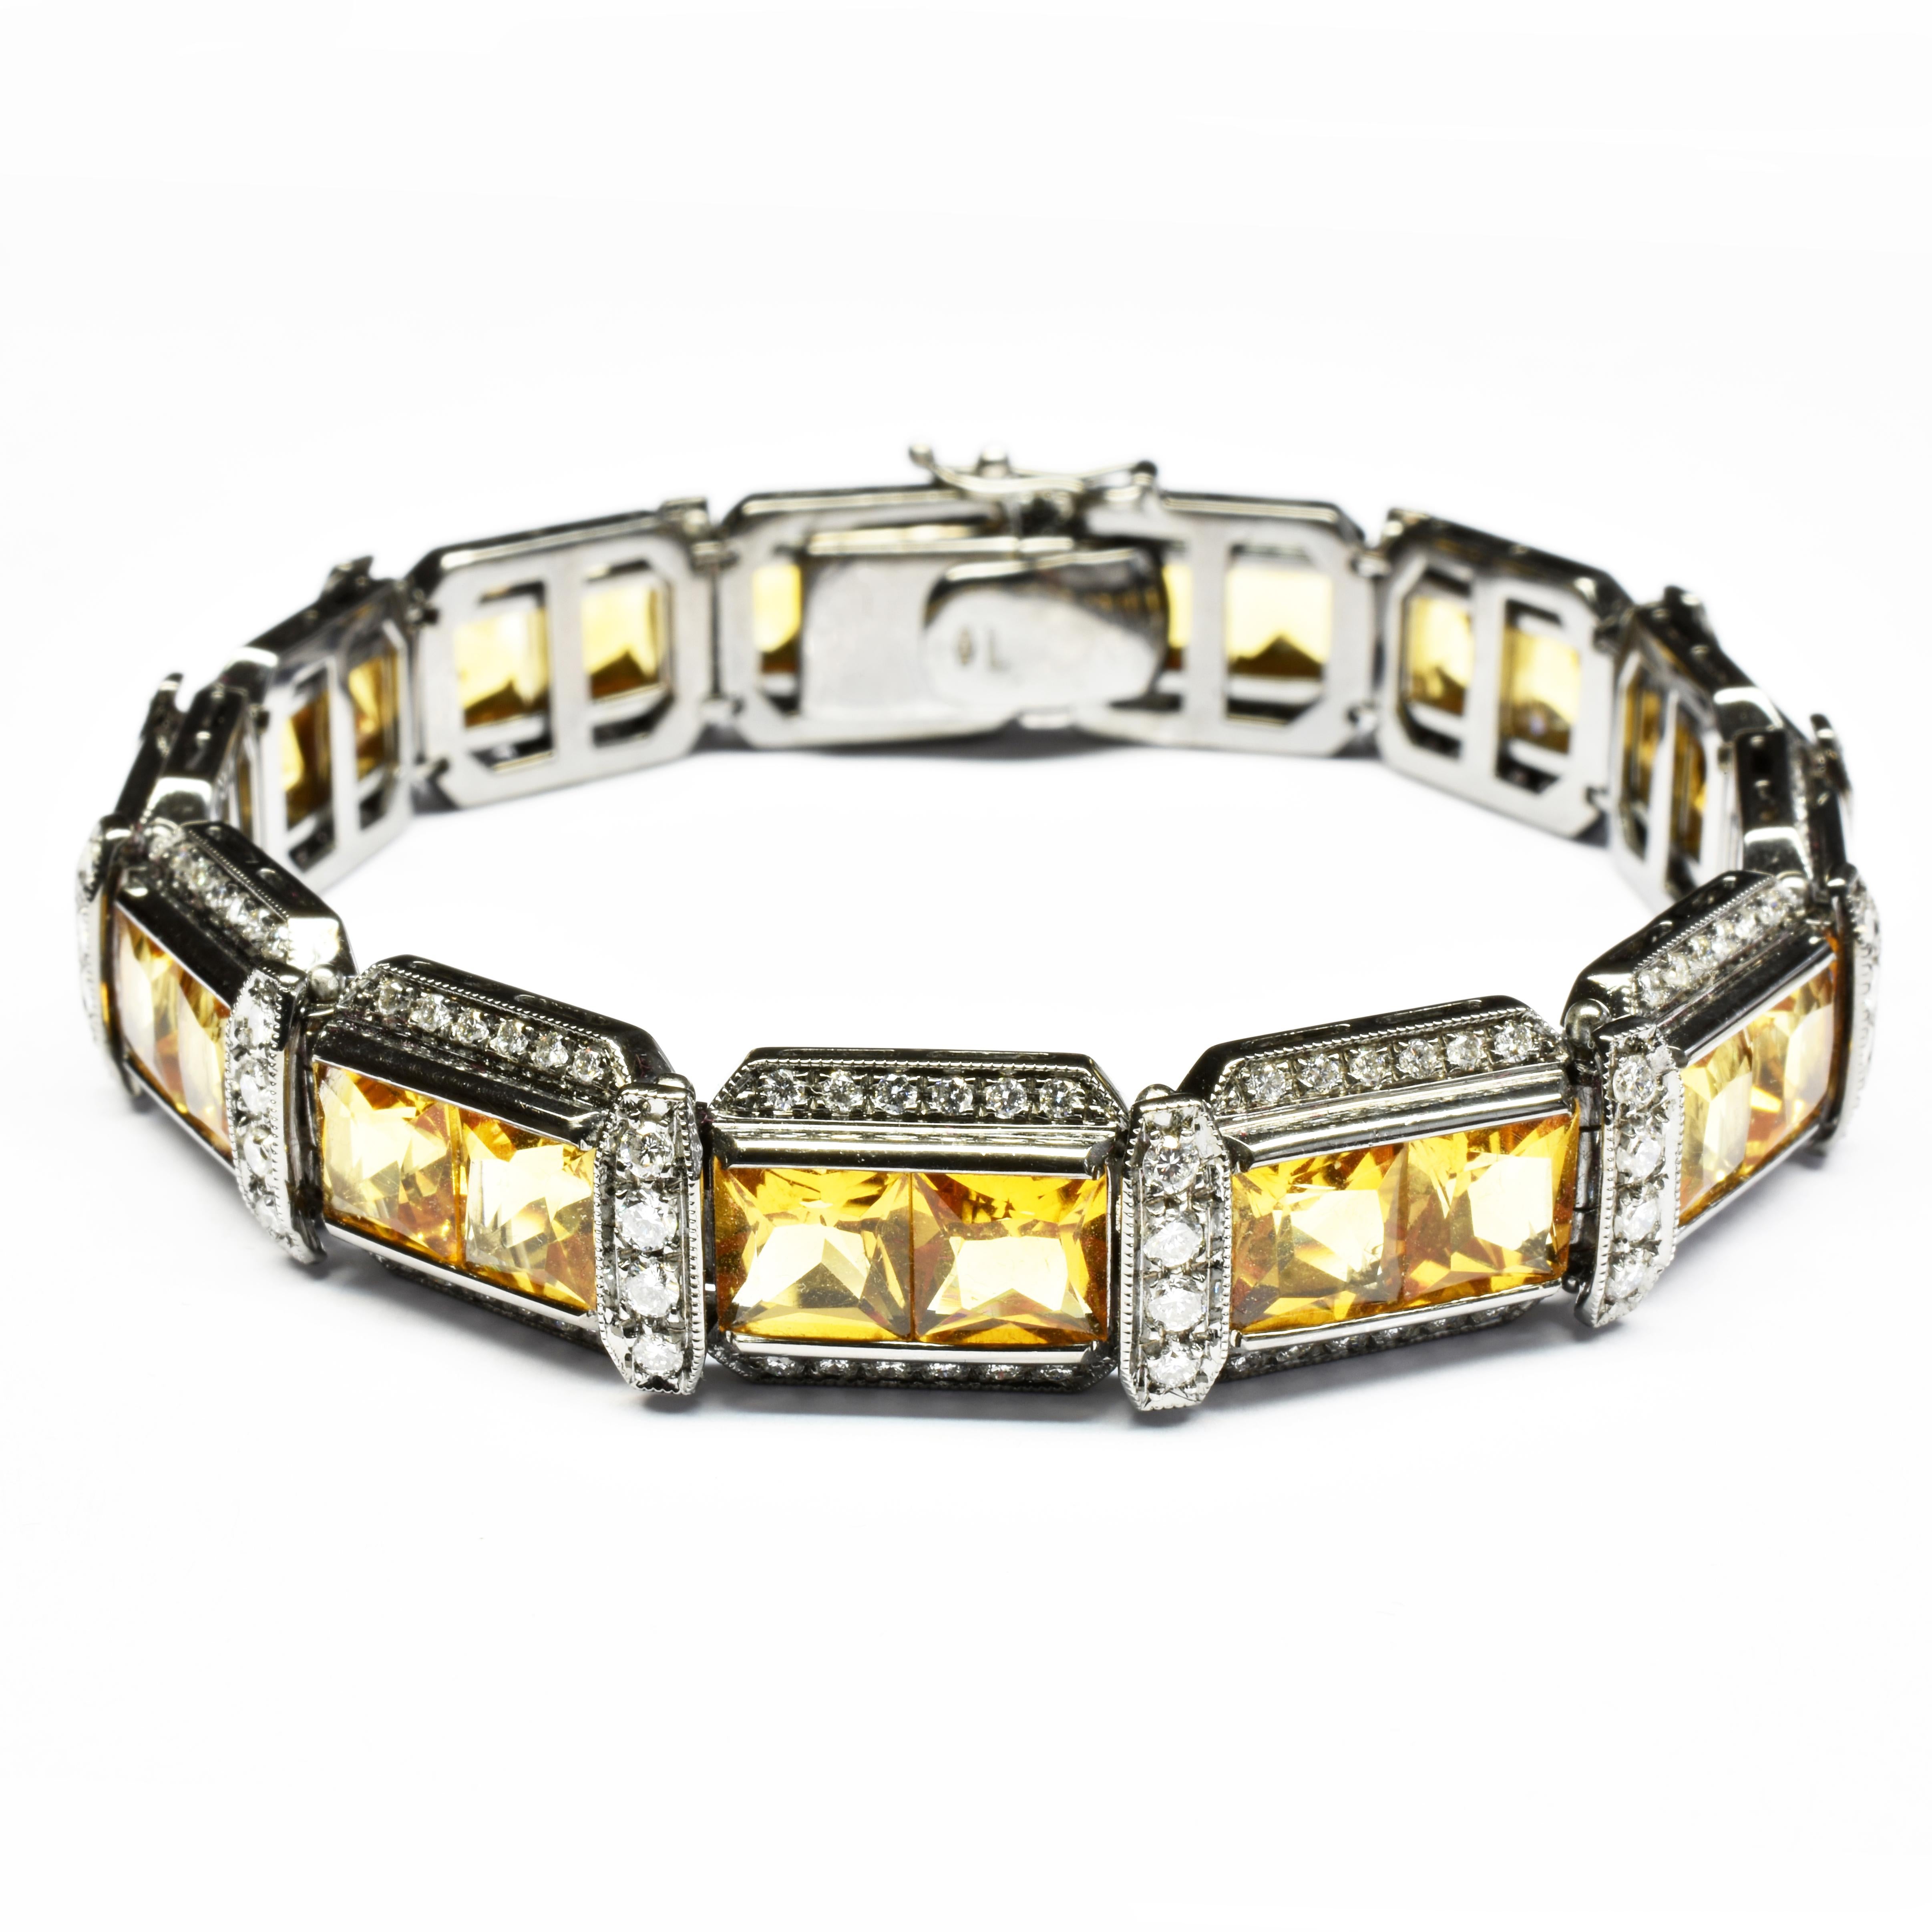 Gilberto Cassola 18 Kt Black Gold Bracelet with Princess Cut Citrine Quartzs and White Diamonds.
This Unique Bracelet Gold is Black Rhodium Plated for a Modern and Stylish Look perfectly matching either a Cocktail Dress or a Leather Jacket. 